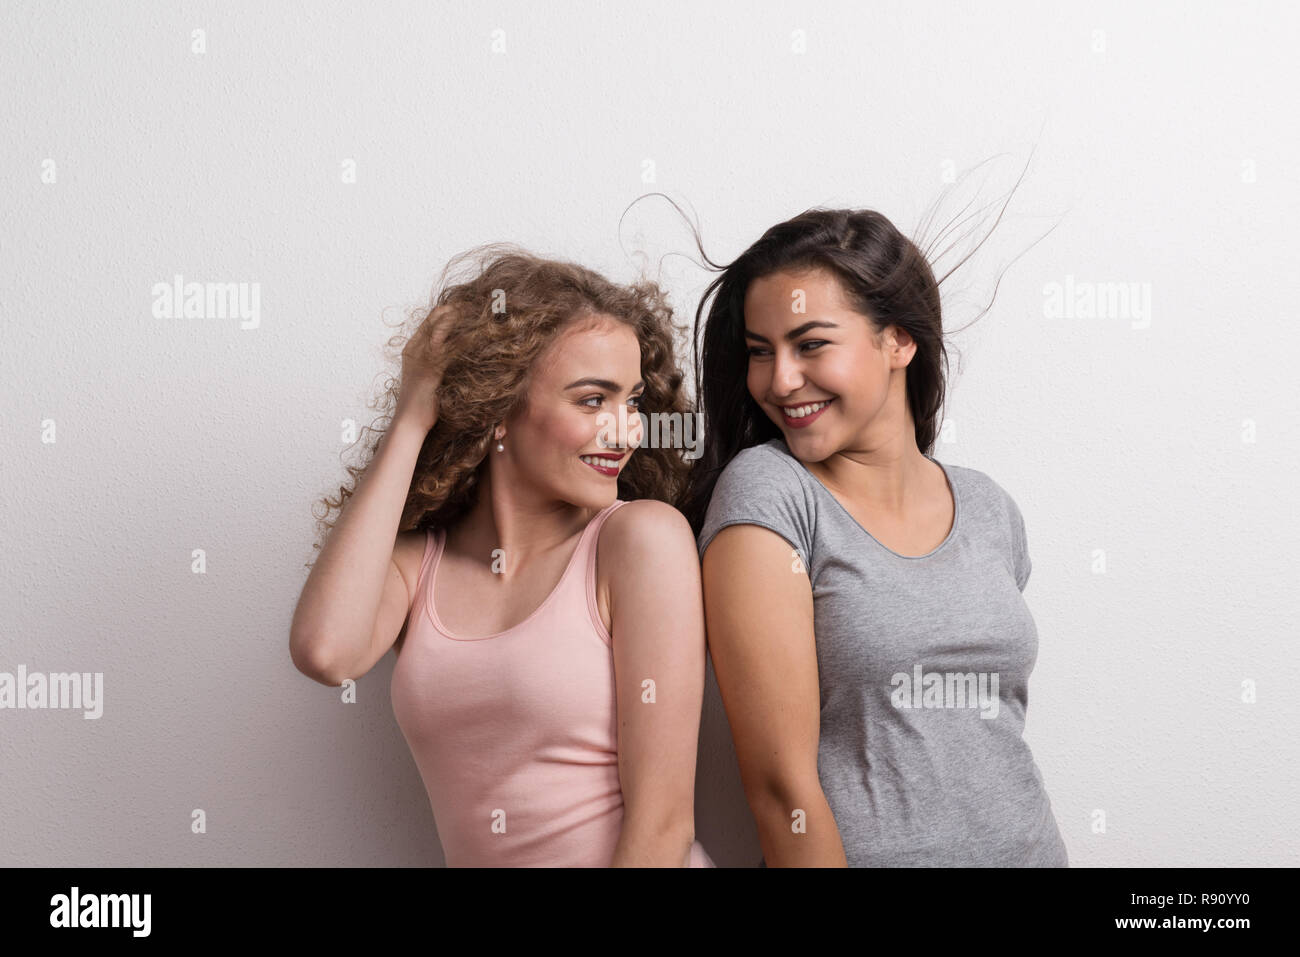 Young beautiful women in studio, looking at each other. Stock Photo